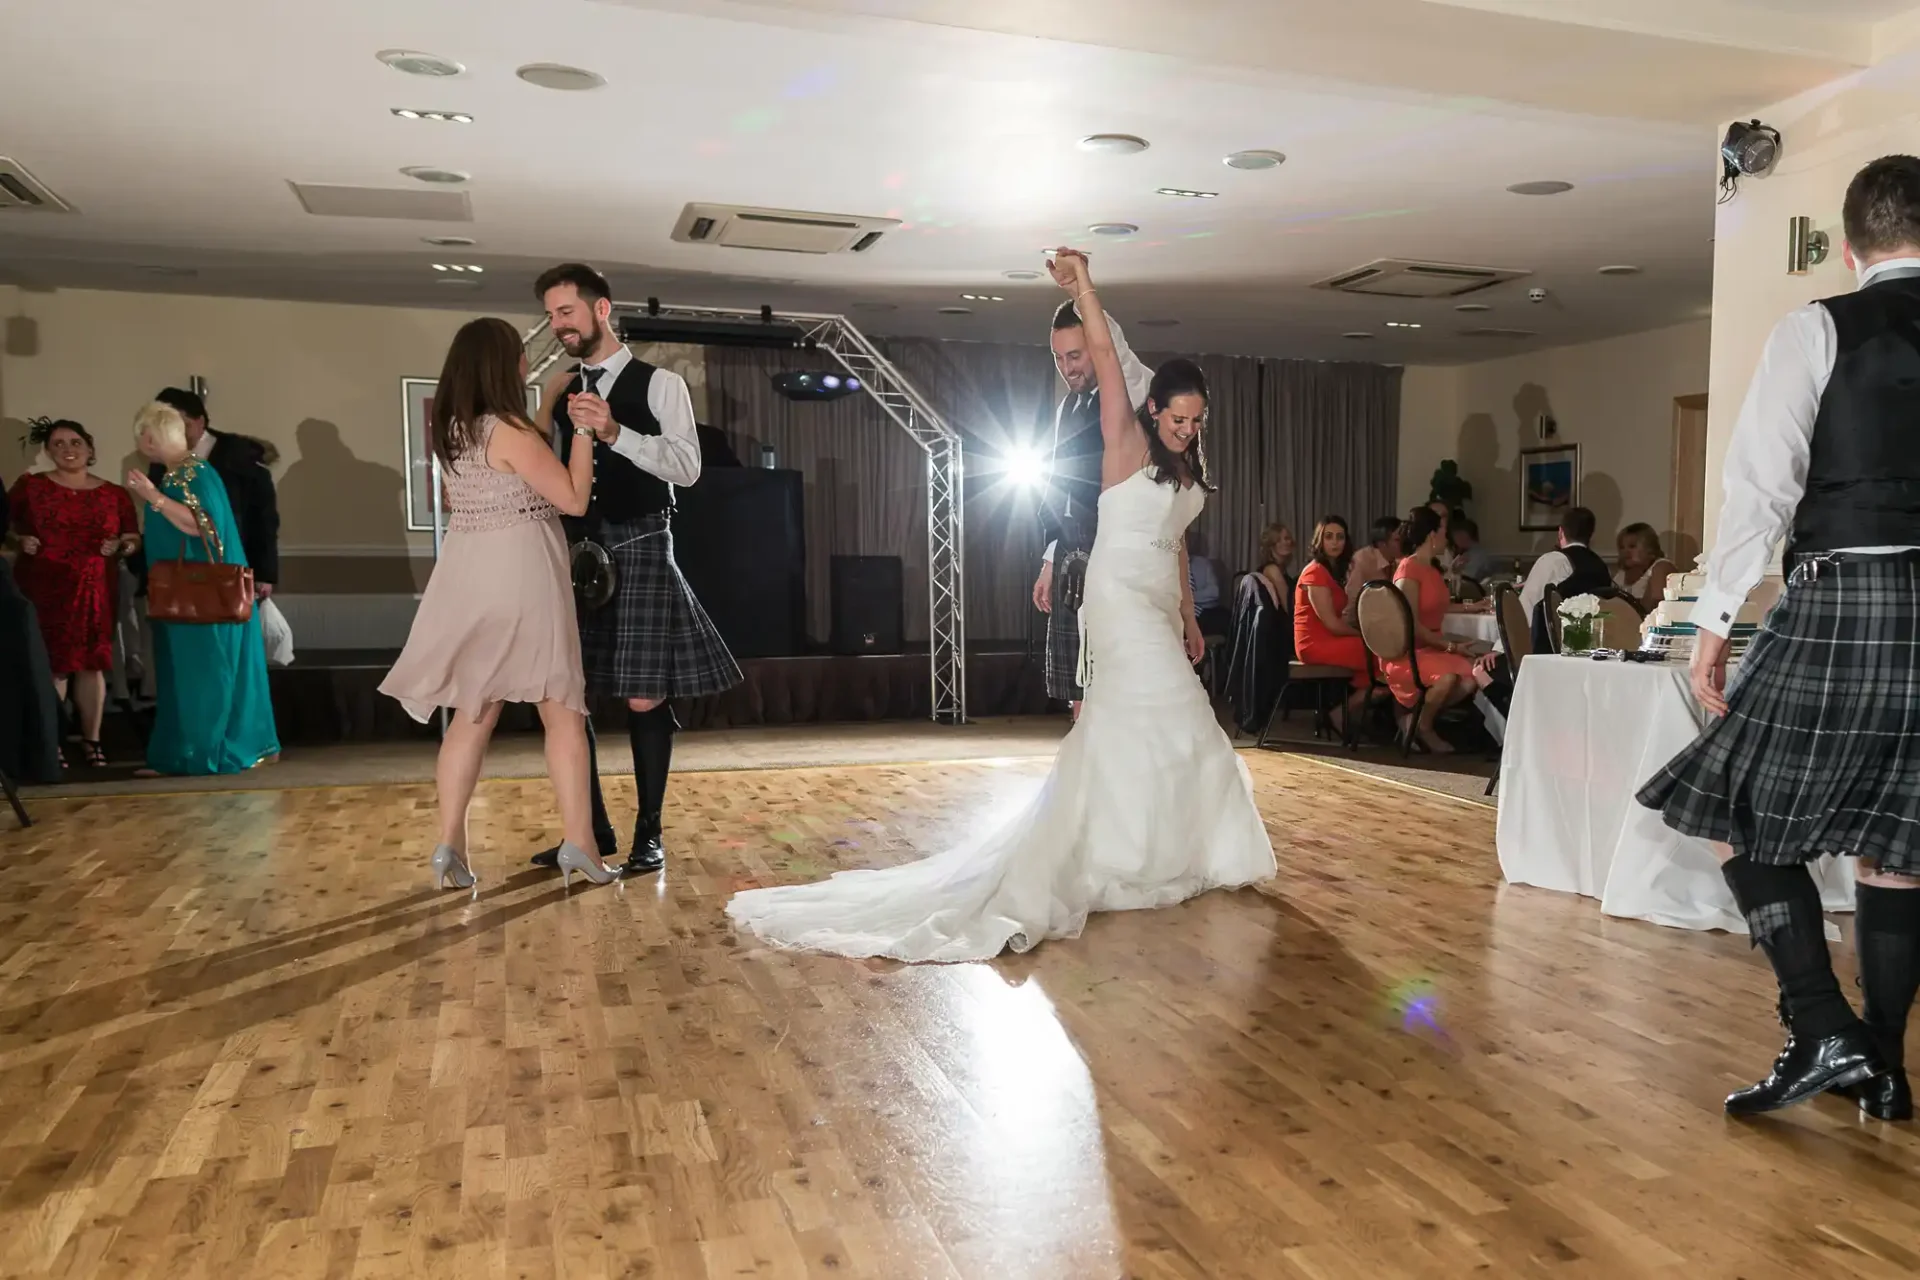 Bride and groom dancing joyfully in a reception hall surrounded by guests, with a man in a kilt singing into a microphone.